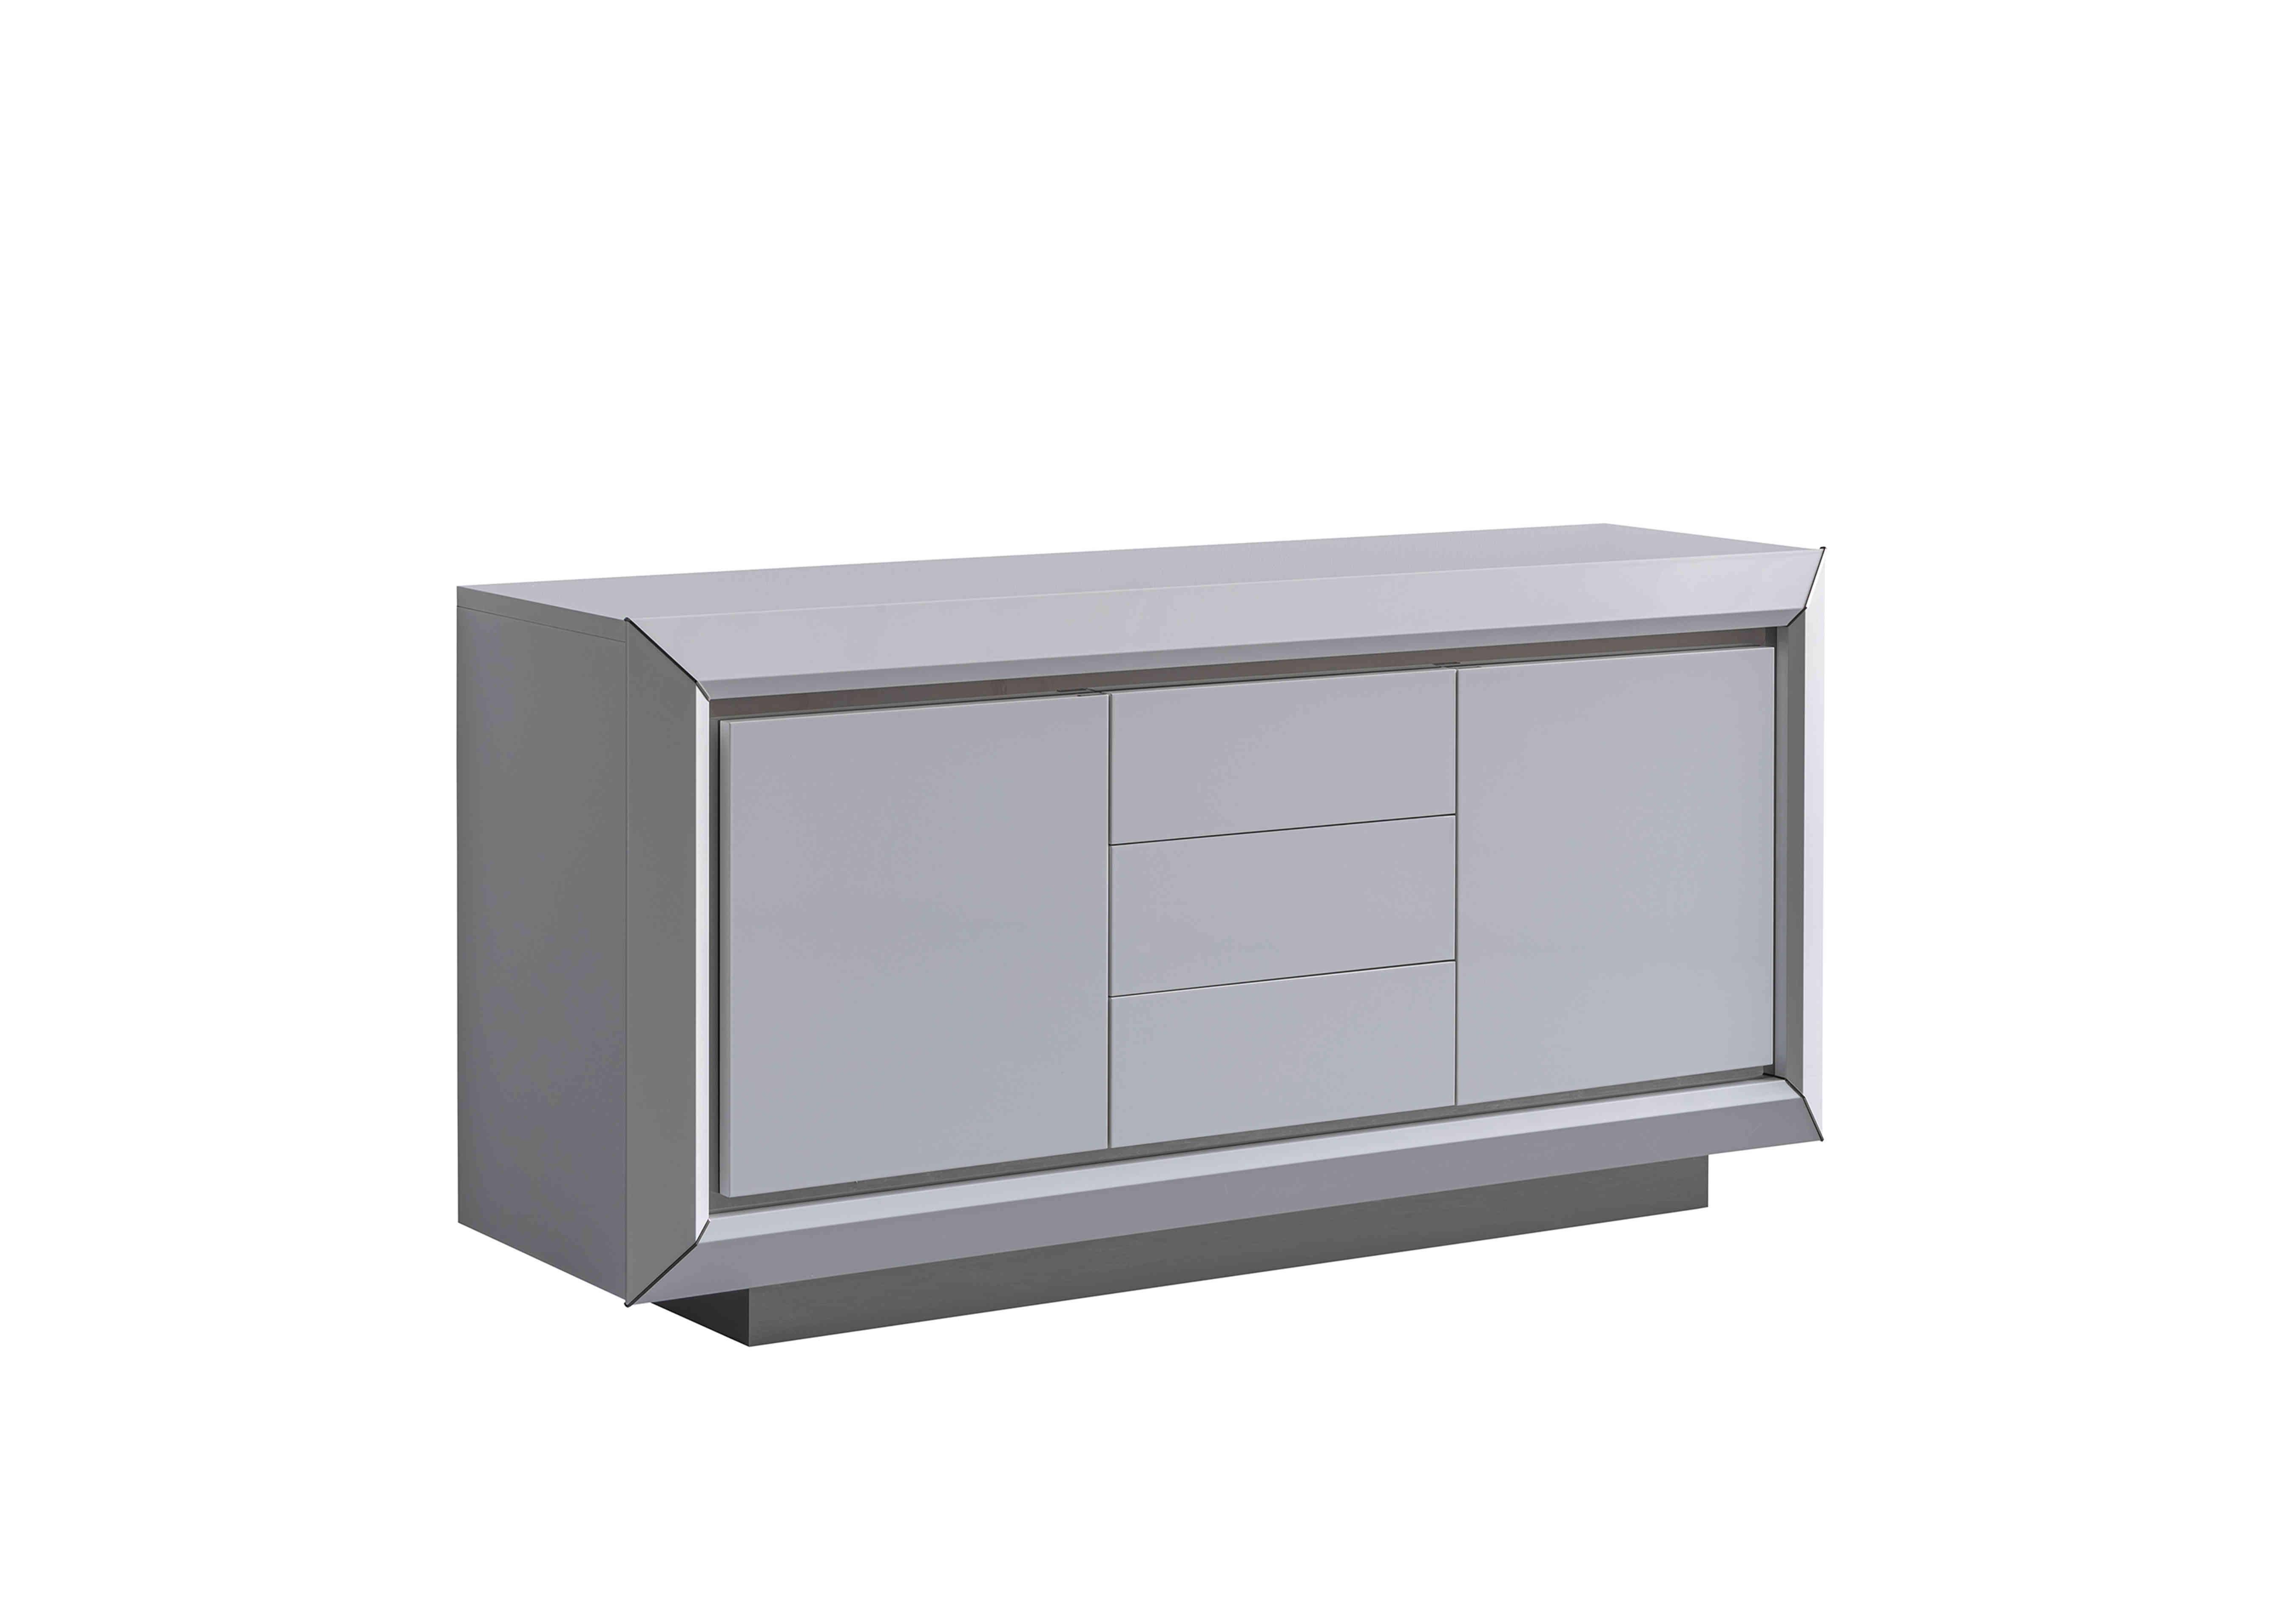 Palazzo Large Sideboard in Glossy White on Furniture Village